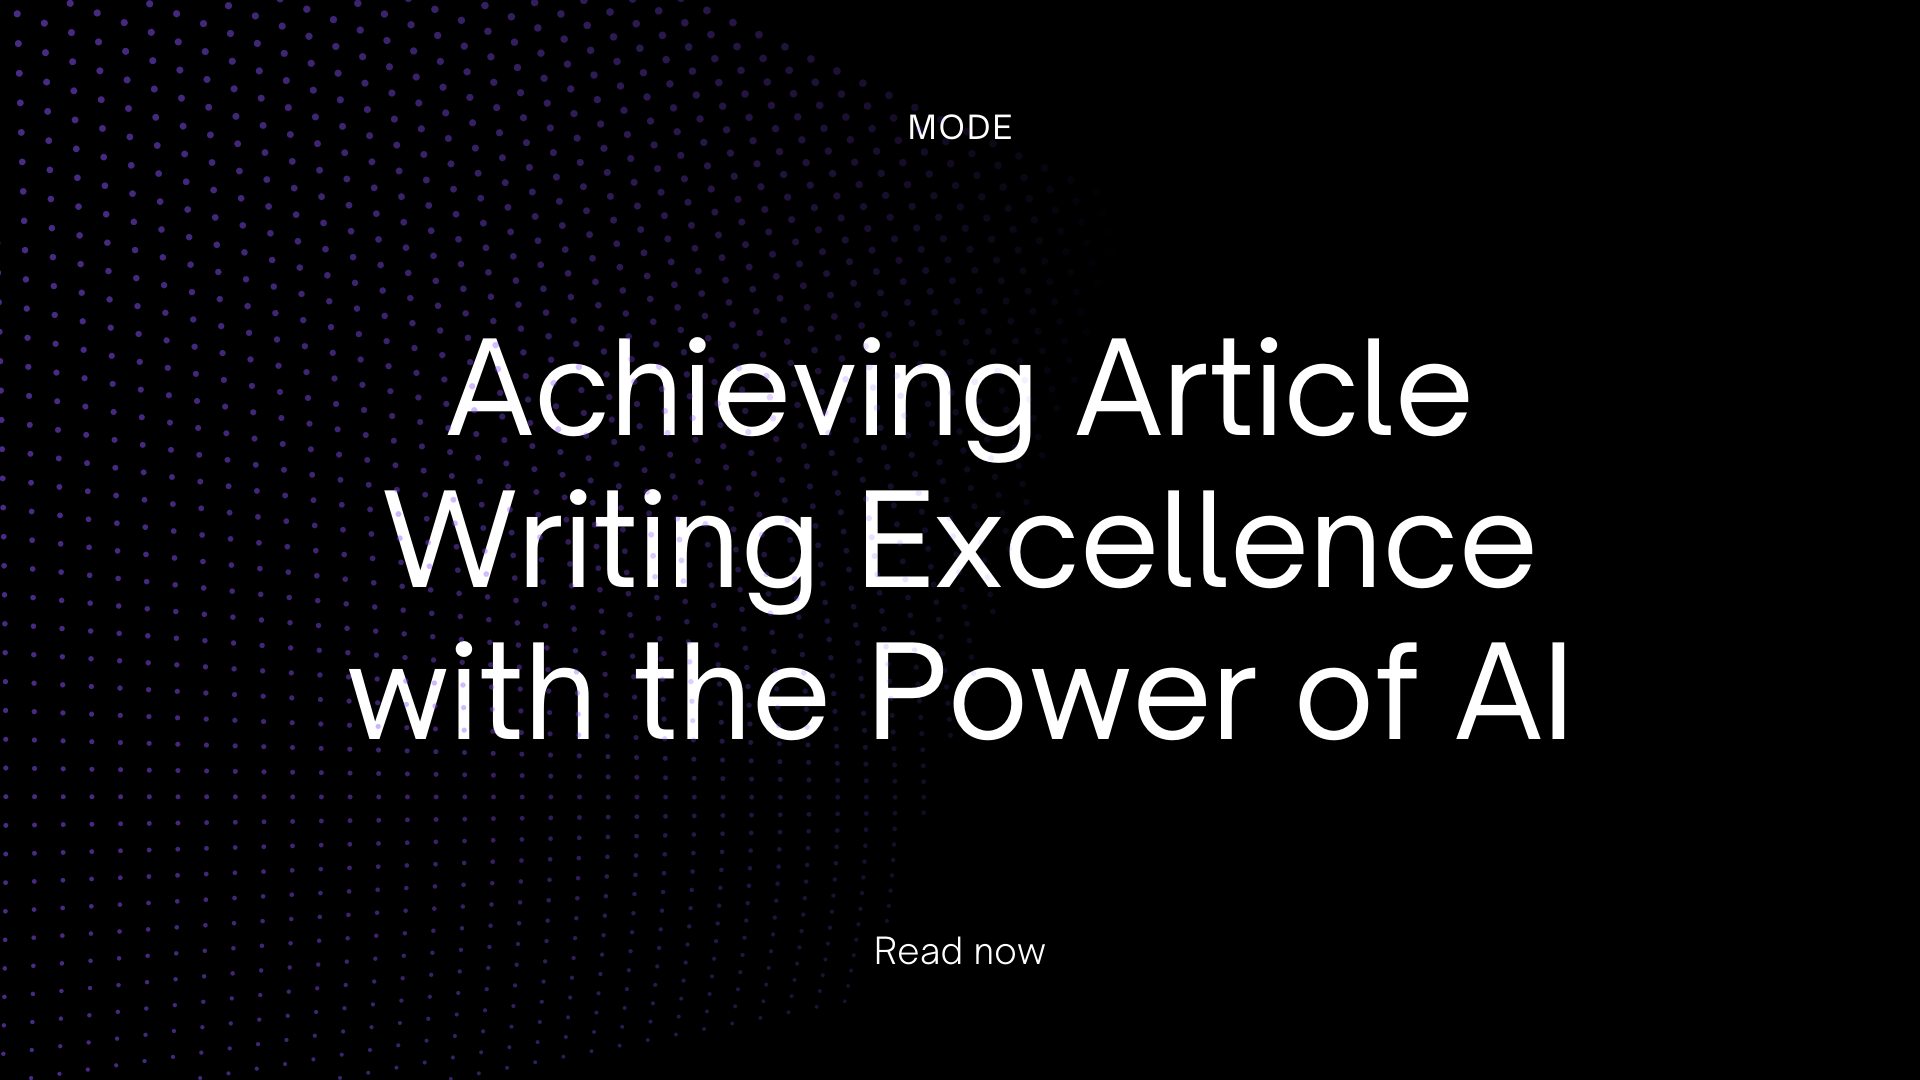 Achieving Article Writing Excellence with the Power of AI